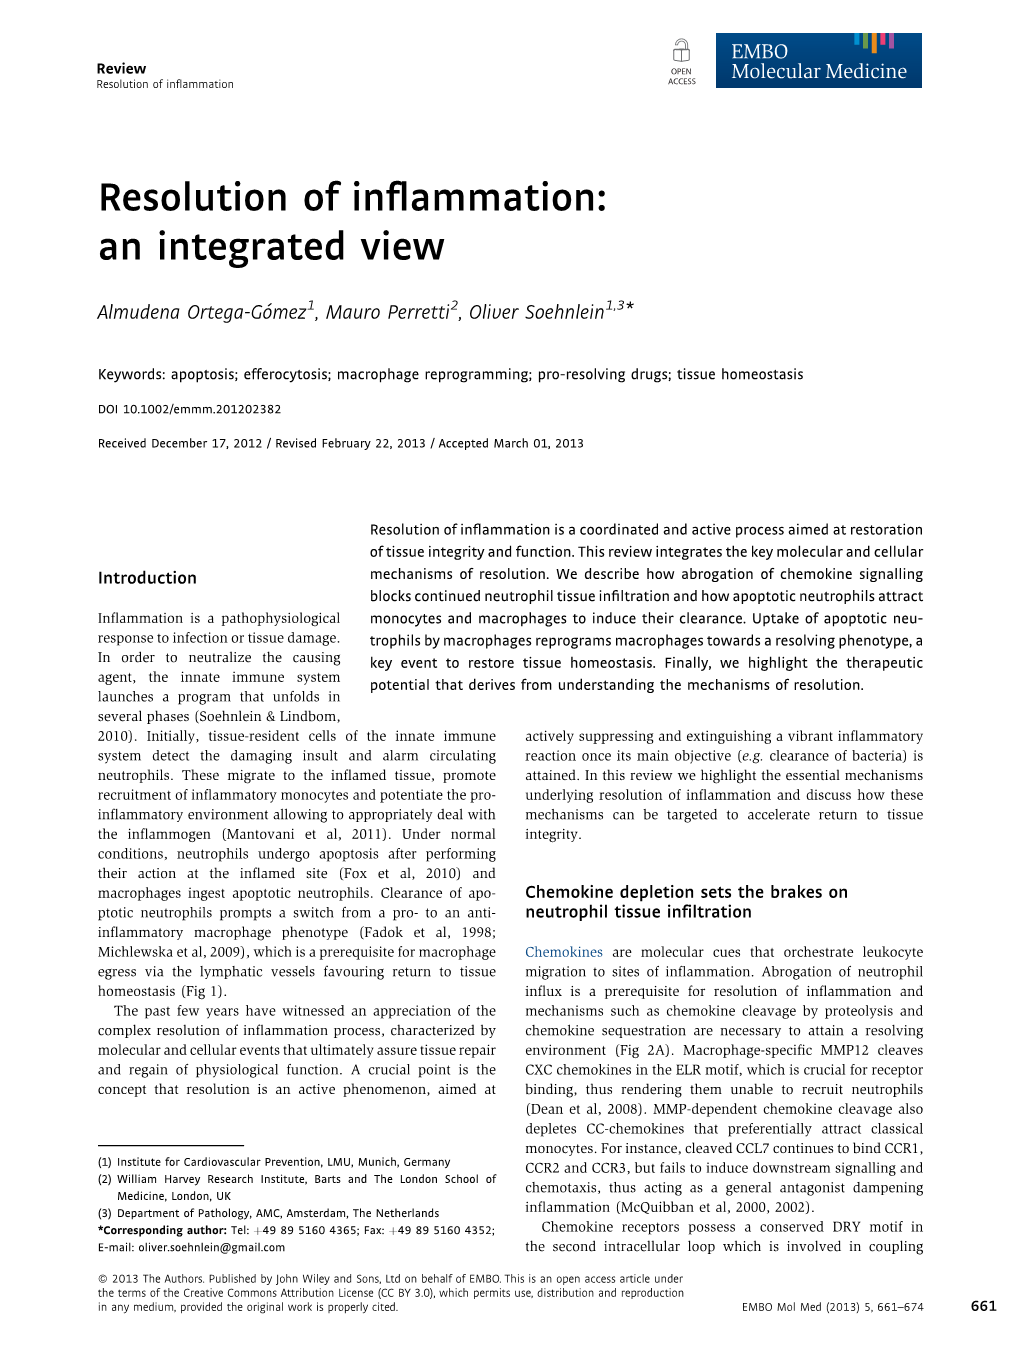 Resolution of Inflammation: an Integrated View